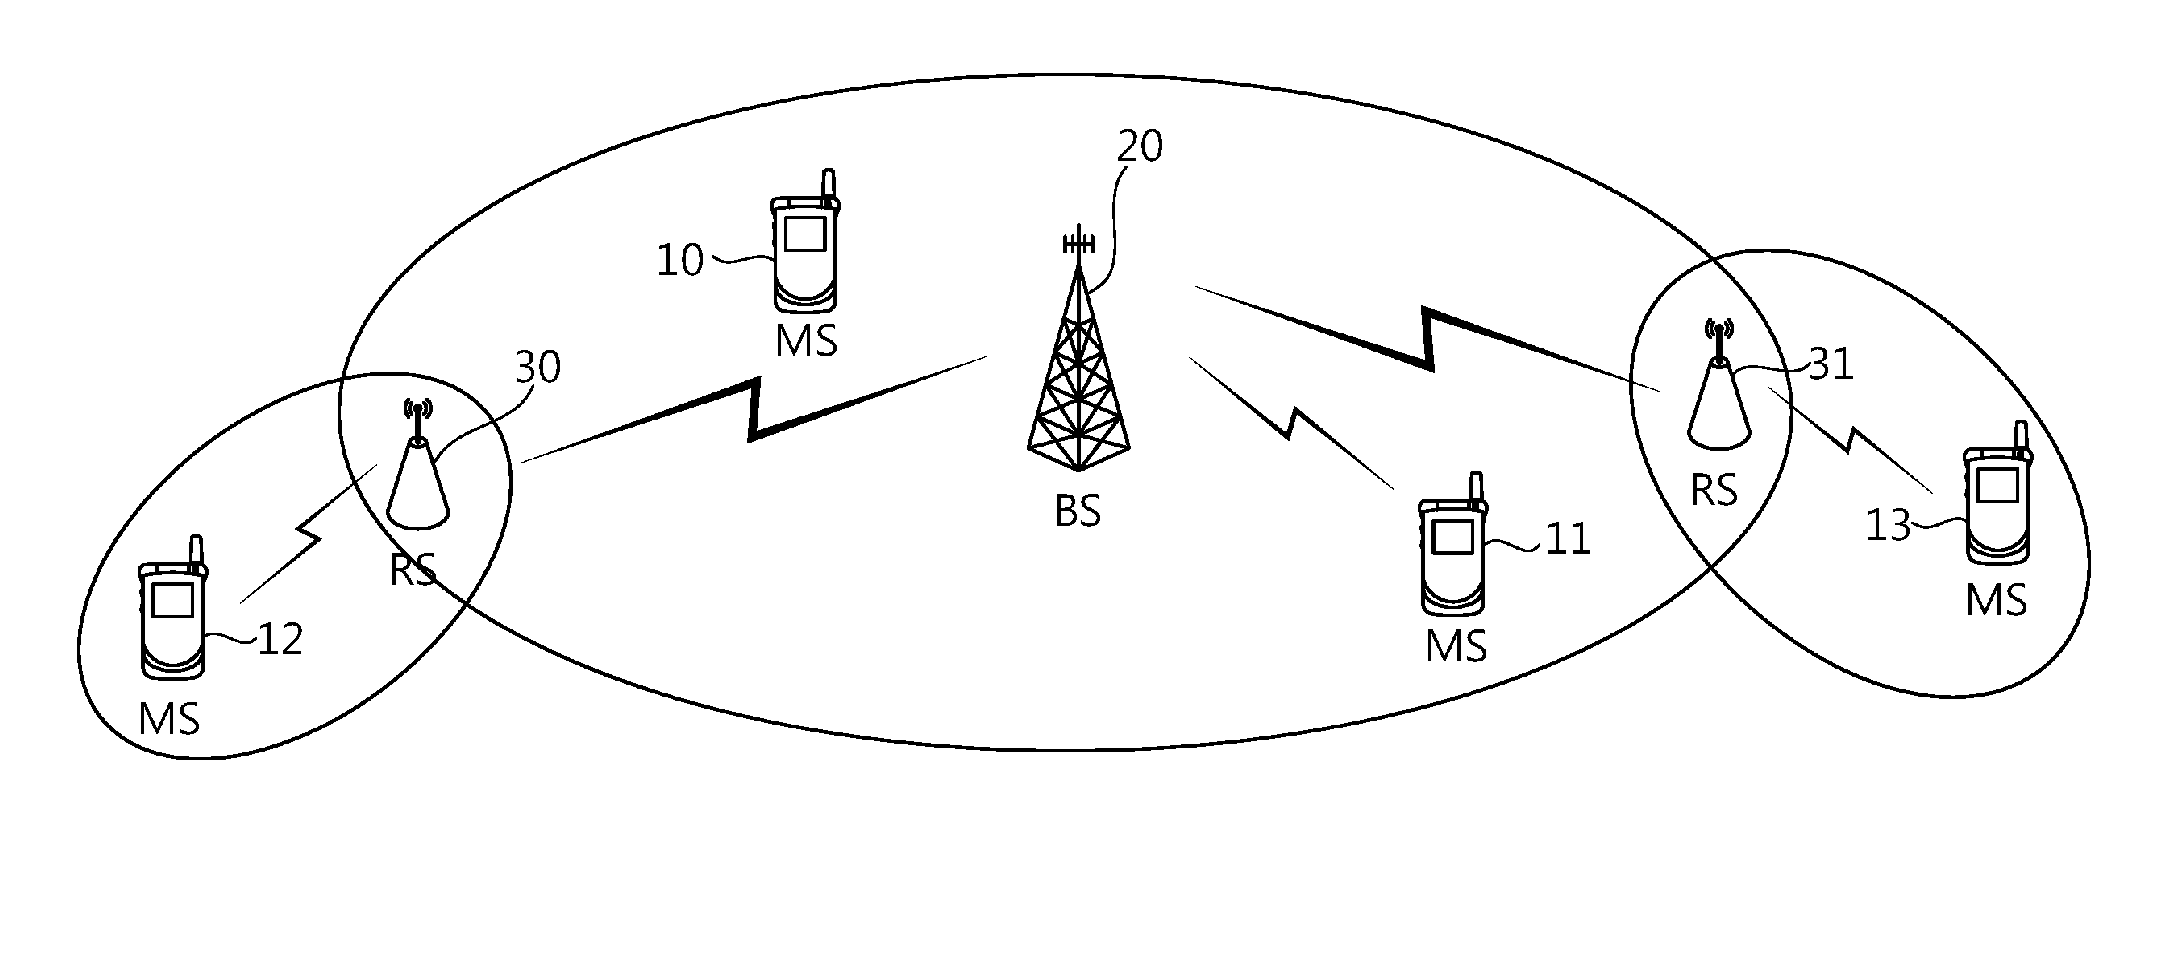 Method for relaying of relay having multiple antenna in wireless communication system